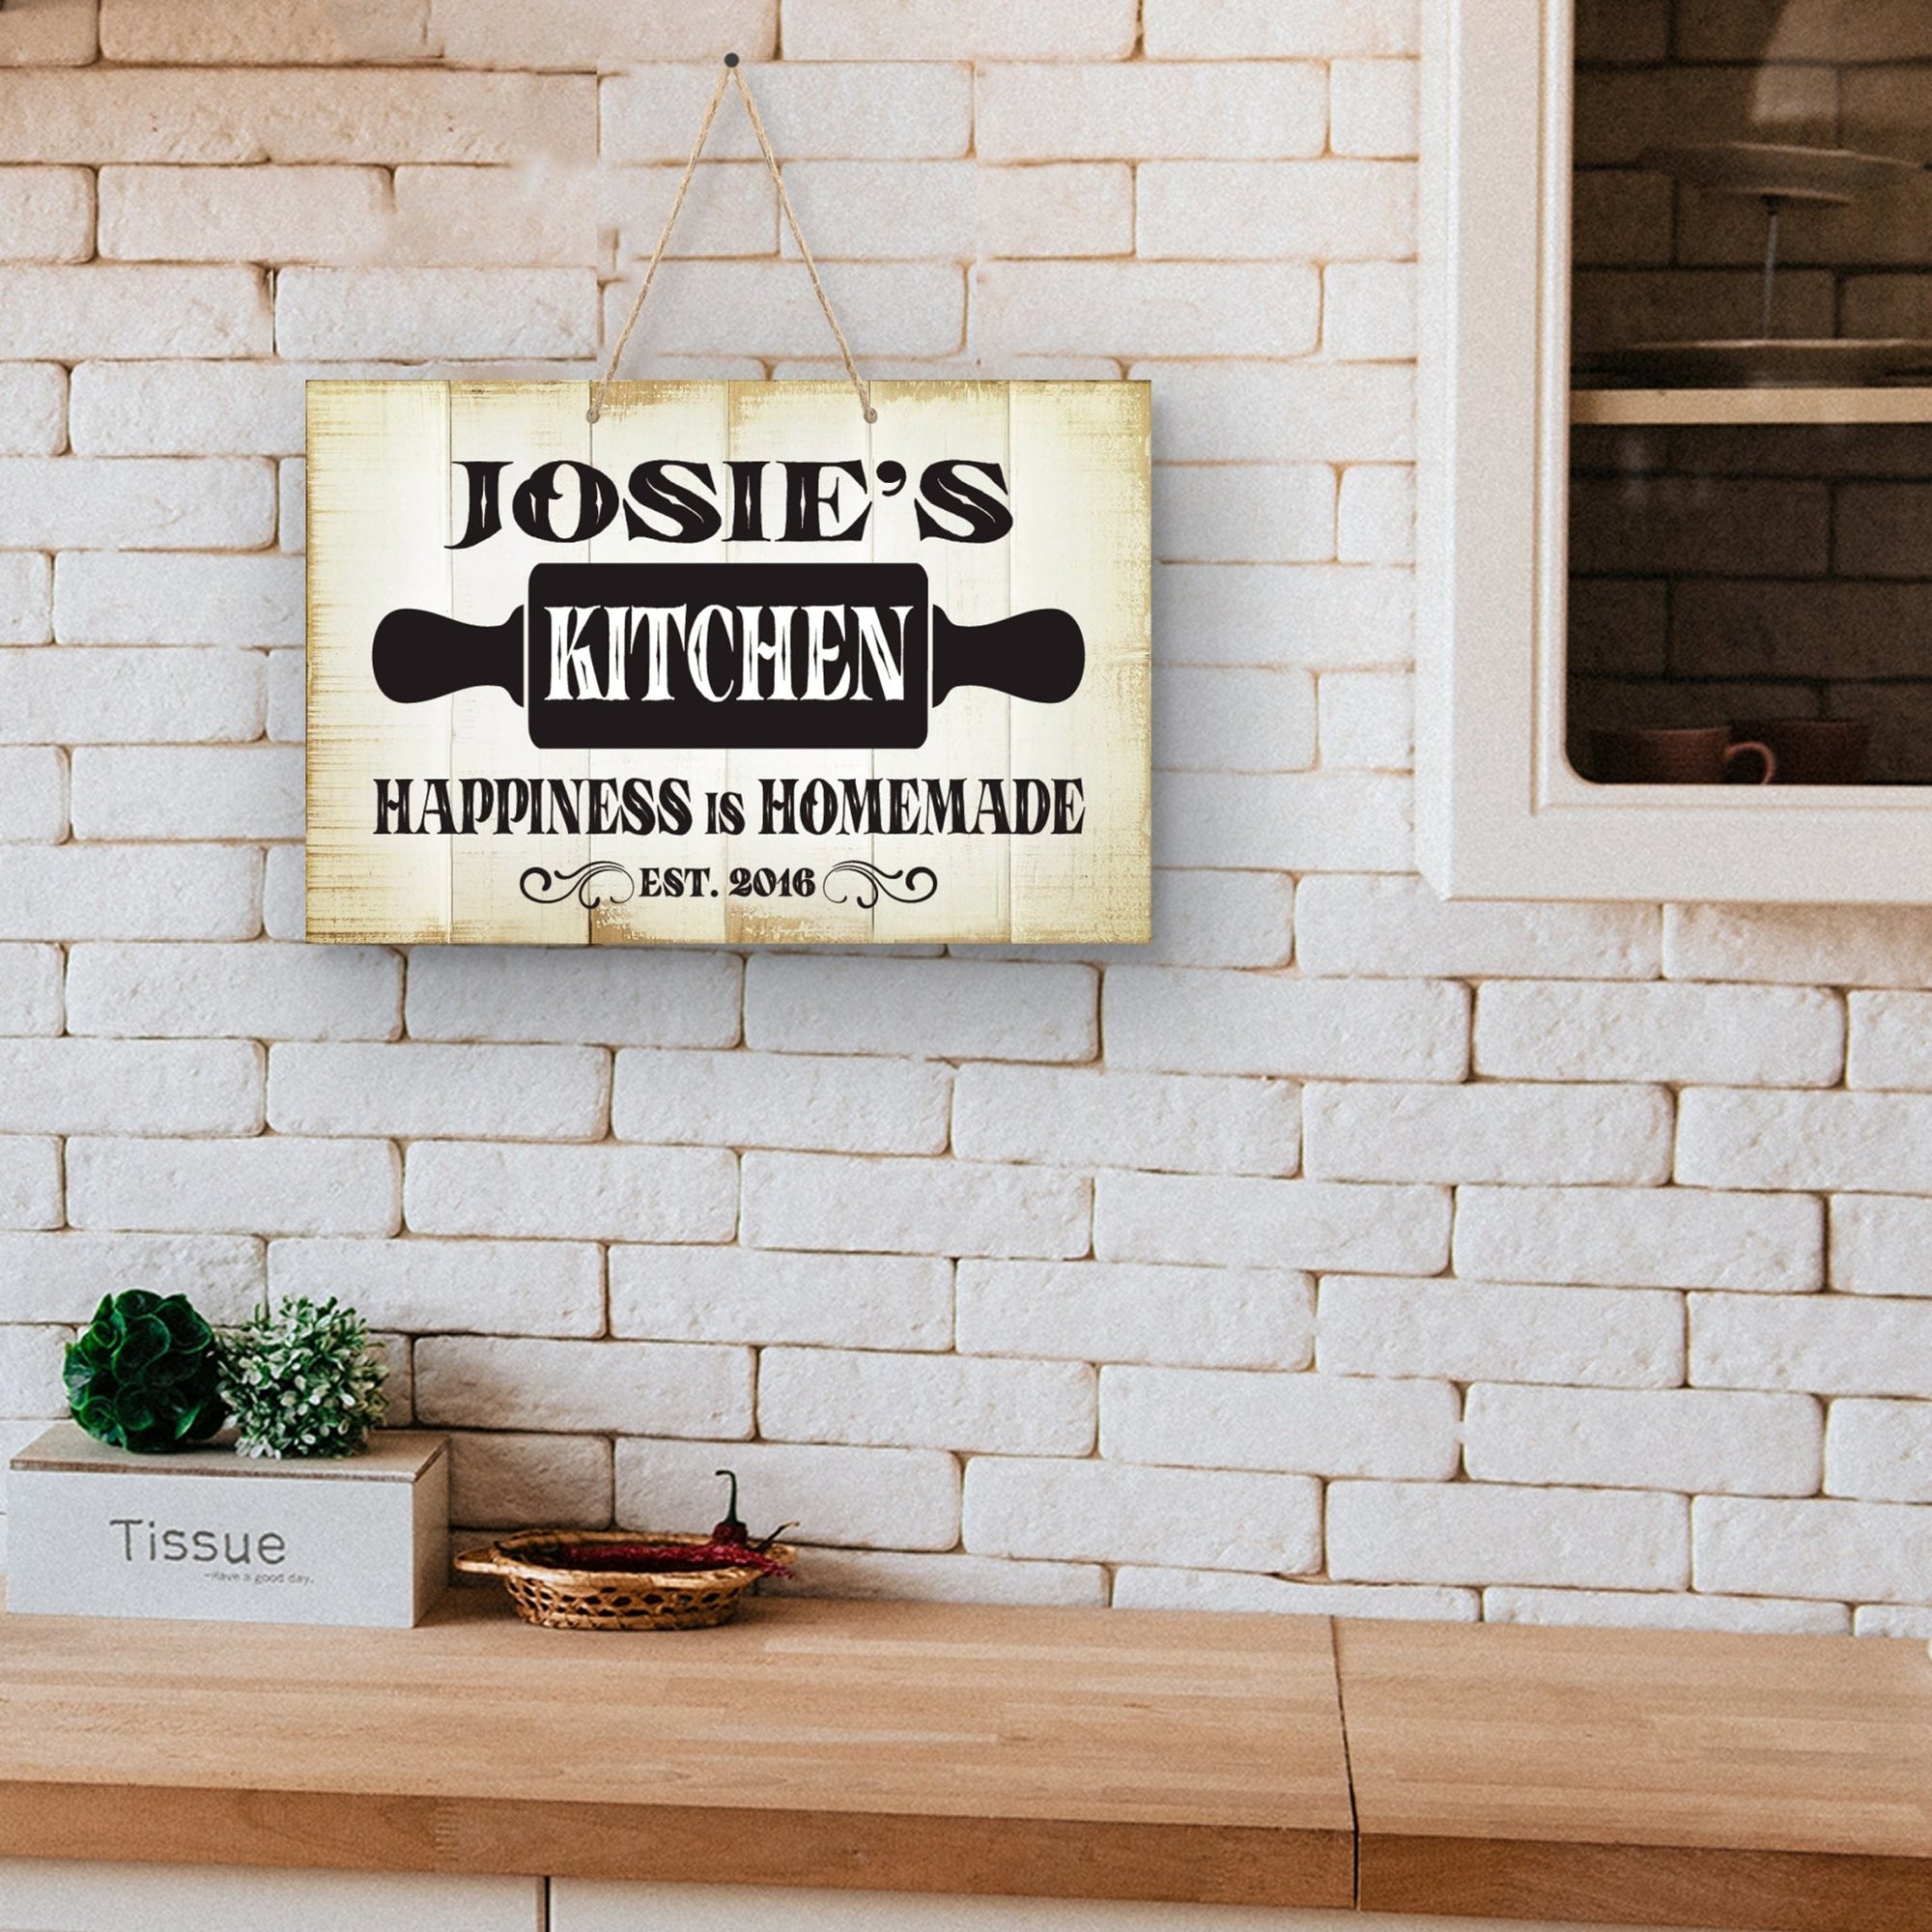 Inspirational Rustic Wooden Wall Hanging Rope Sign Kitchen Décor - Happiness Is Homemade [KITCHEN]